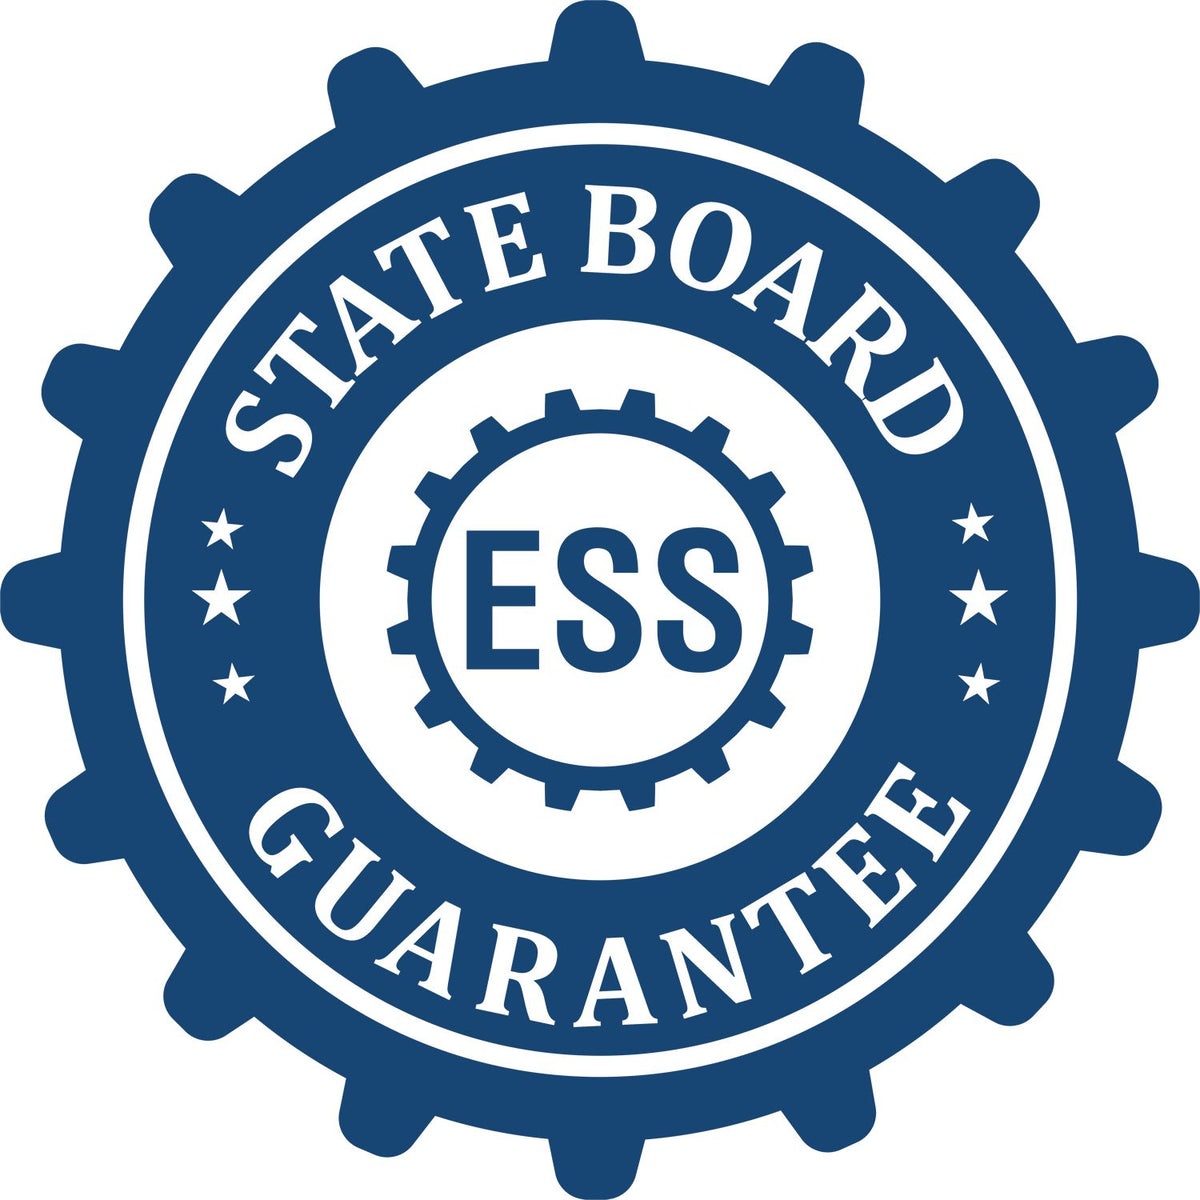 An emblem in a gear shape illustrating a state board guarantee for the State of Oklahoma Extended Long Reach Geologist Seal